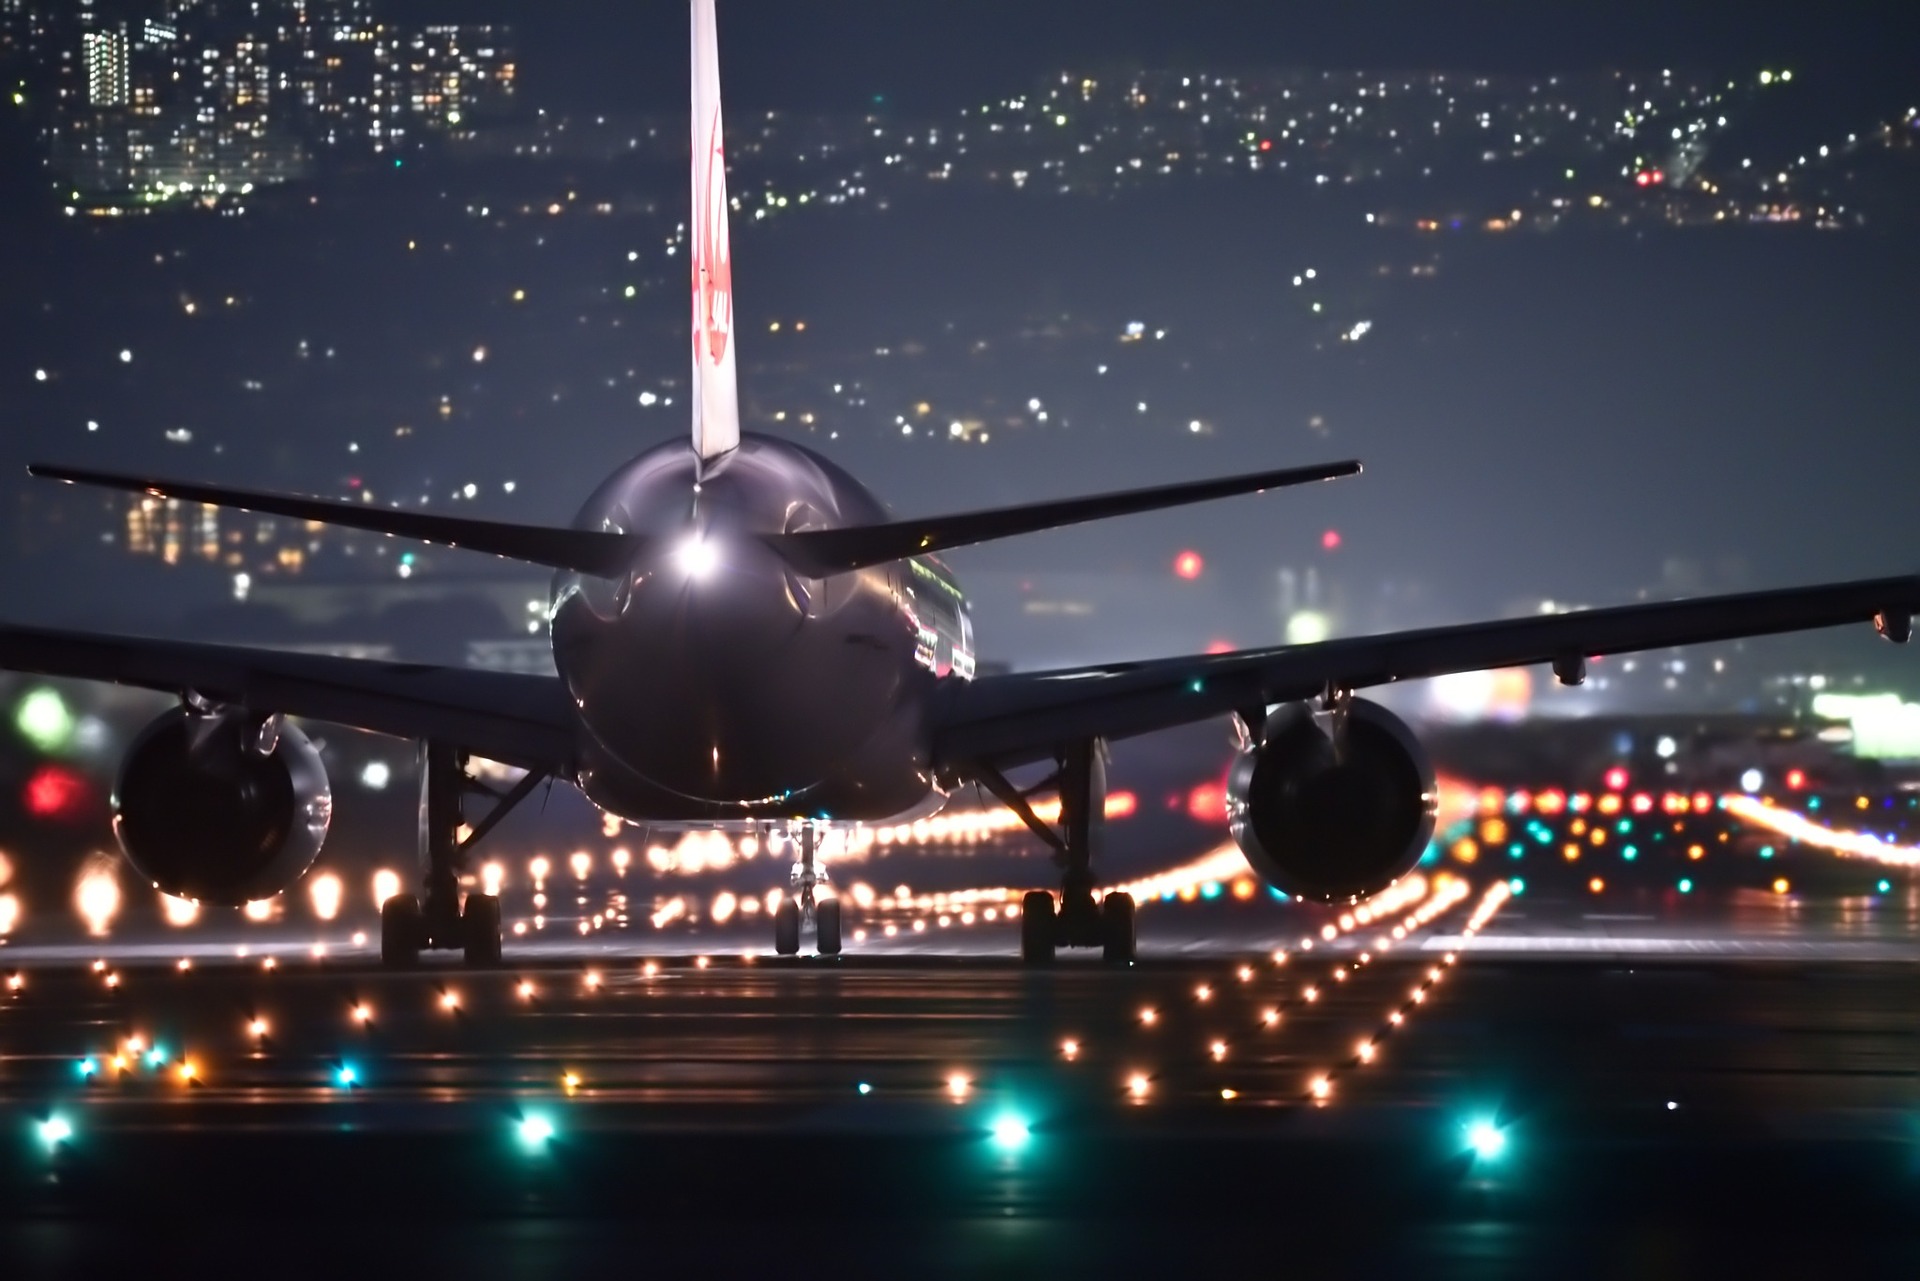 An airplane ready to take of from the runway at night.